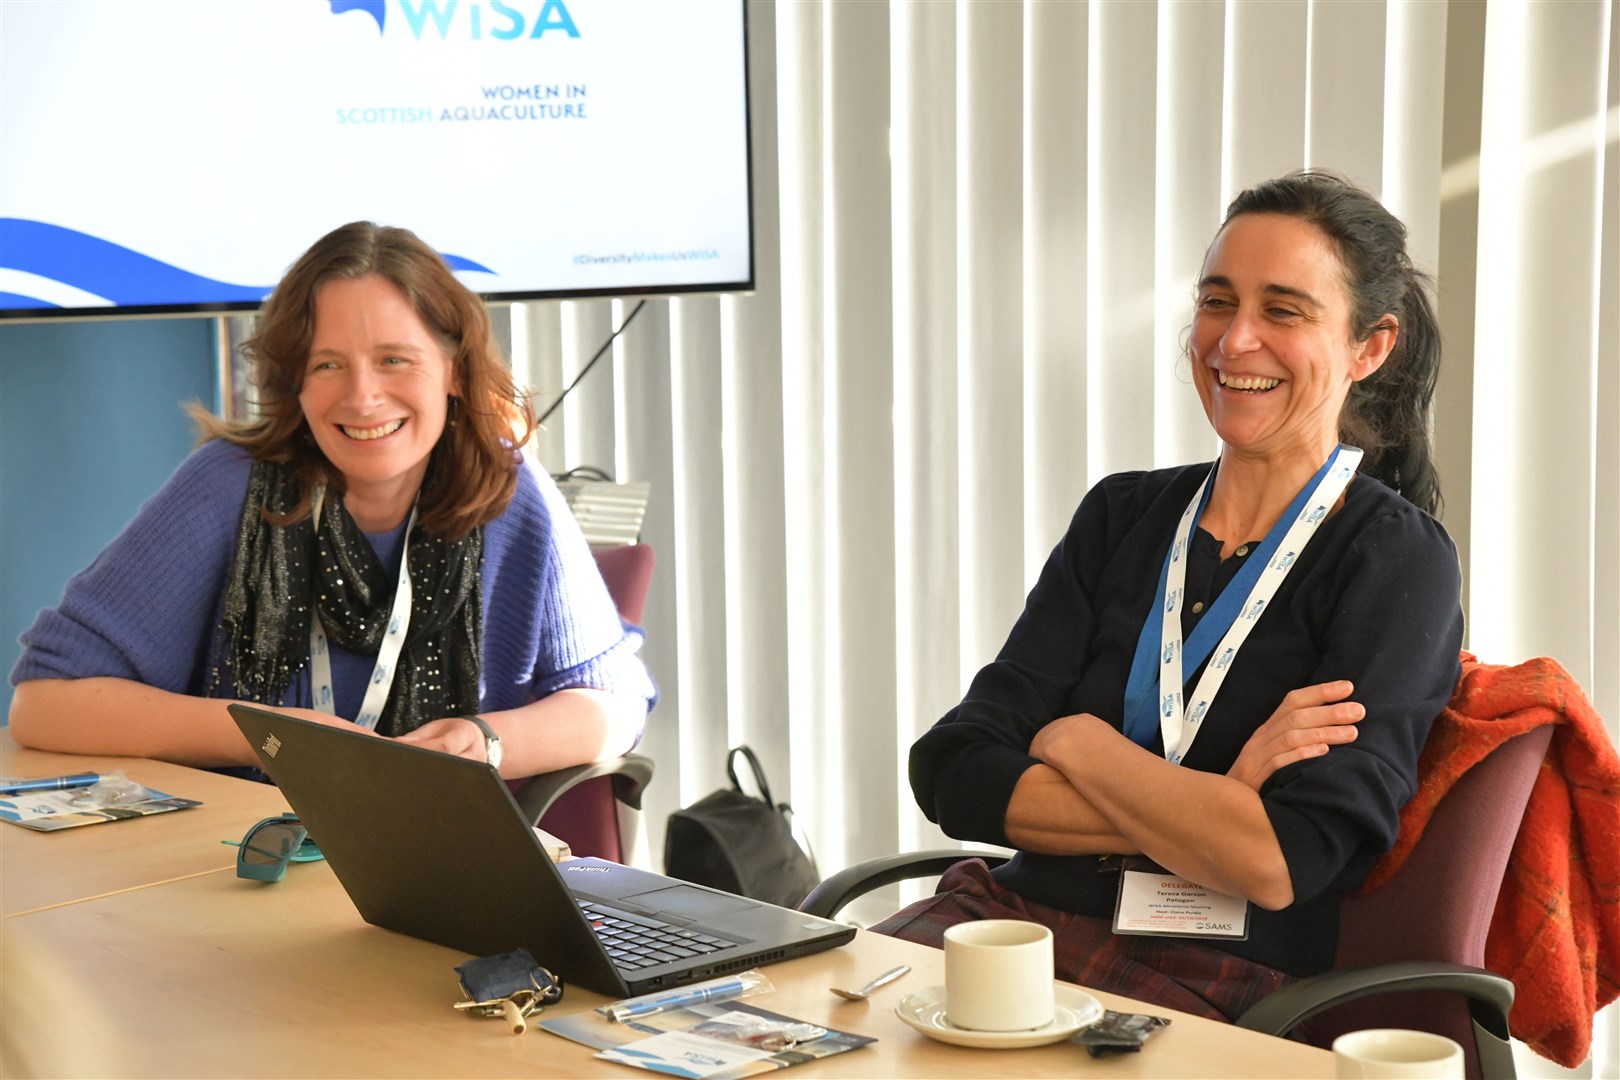 Mary Fraser (left) and co-chairwoman Teresa Garzon of WiSA (Women in Scottish Aquaculture).